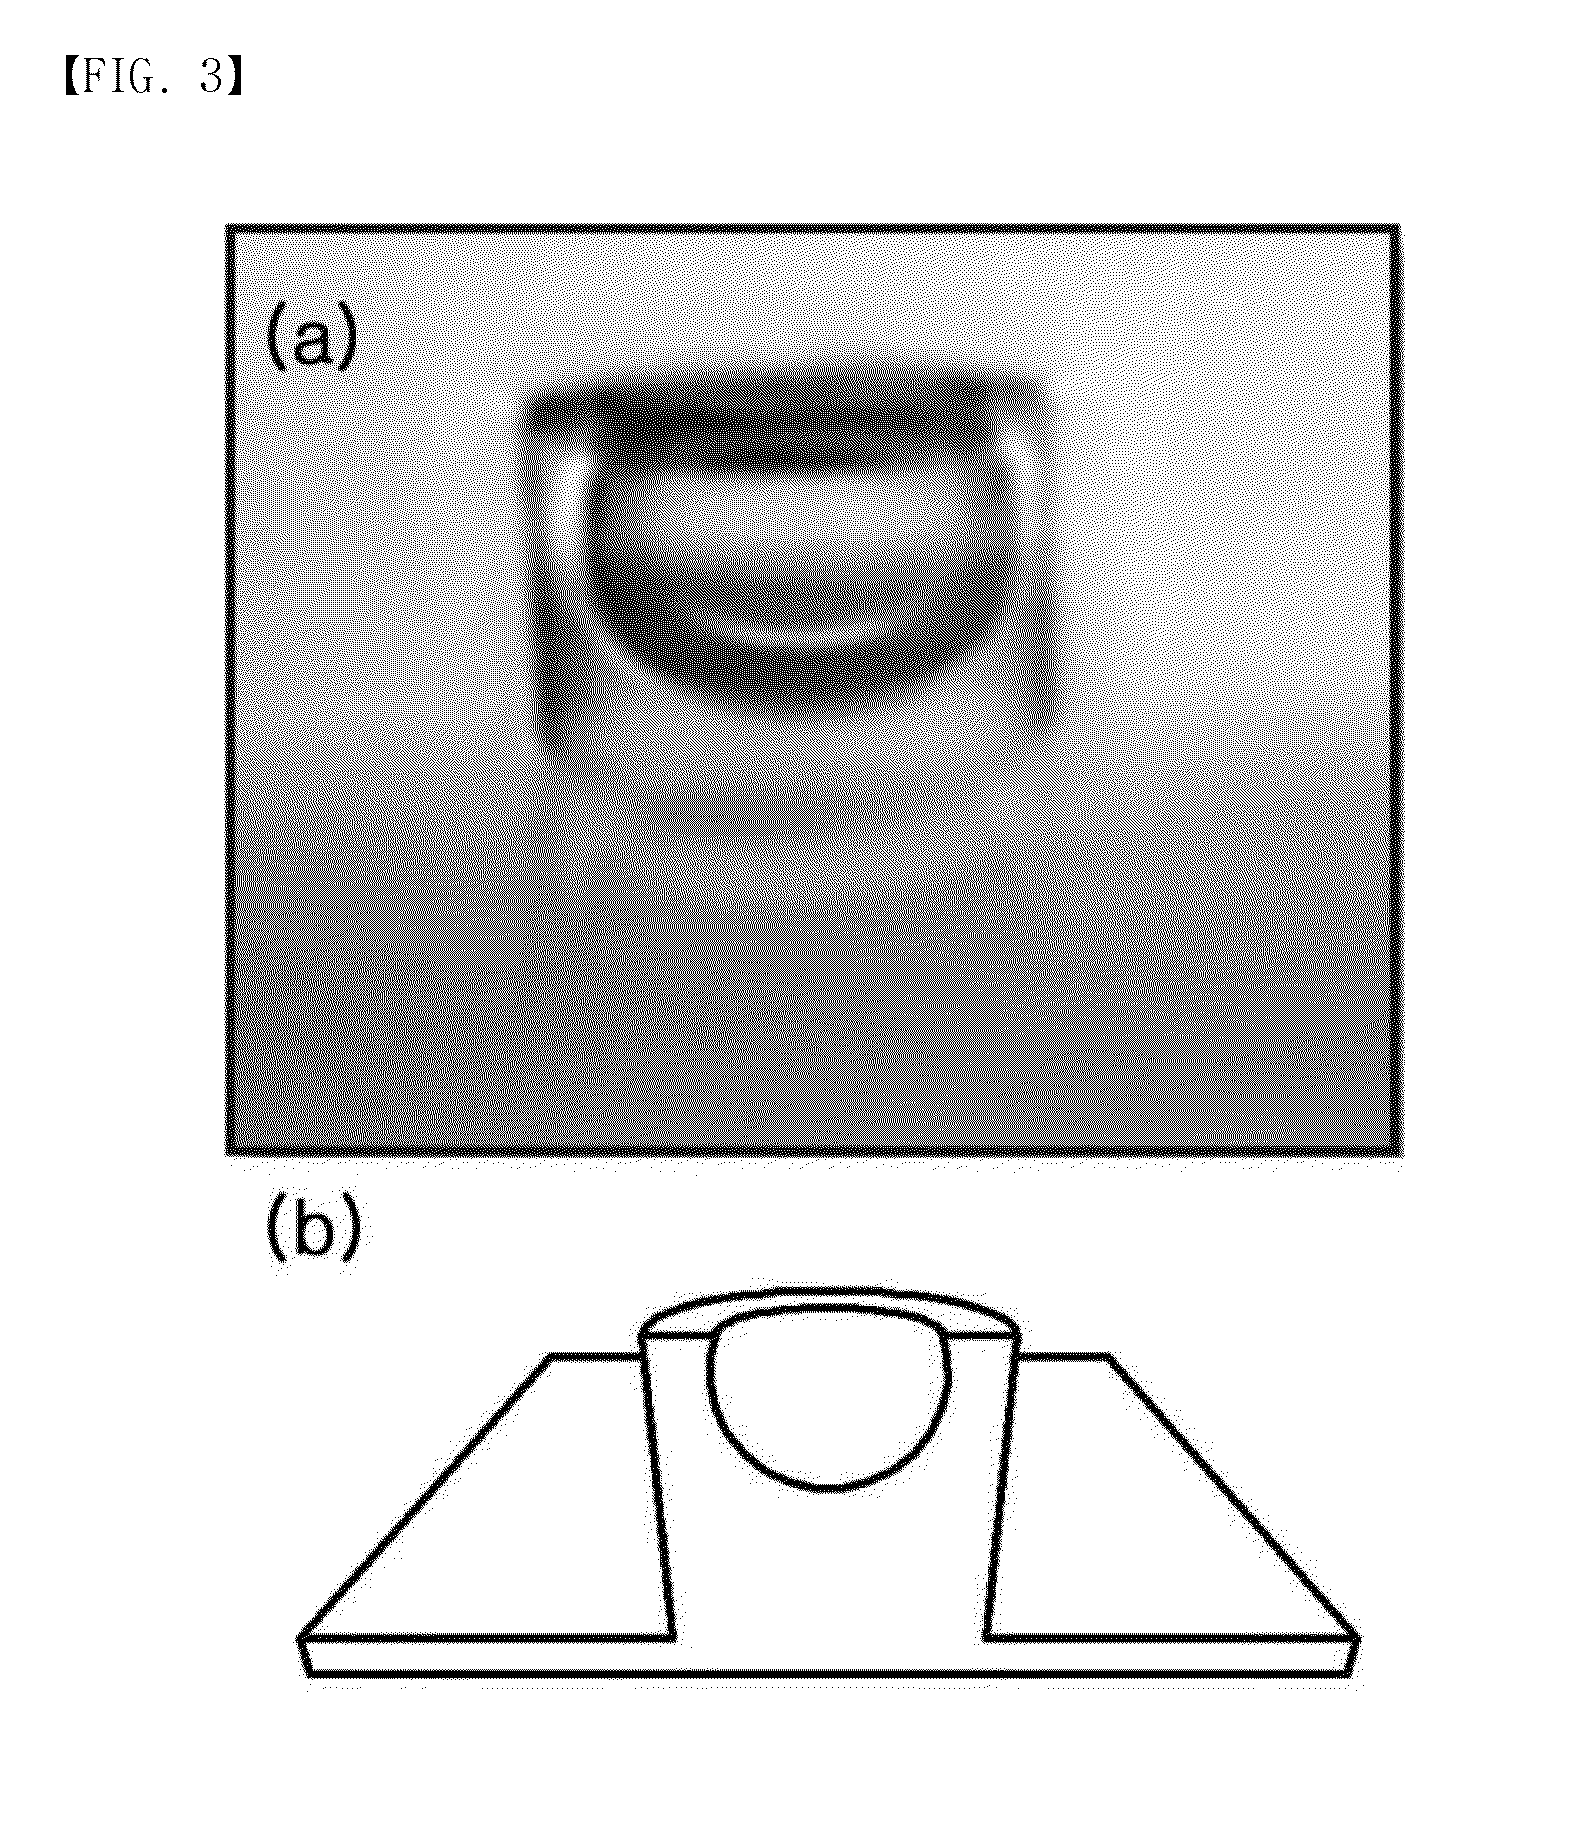 Dry bonding system and wearable device for skin bonding including the same